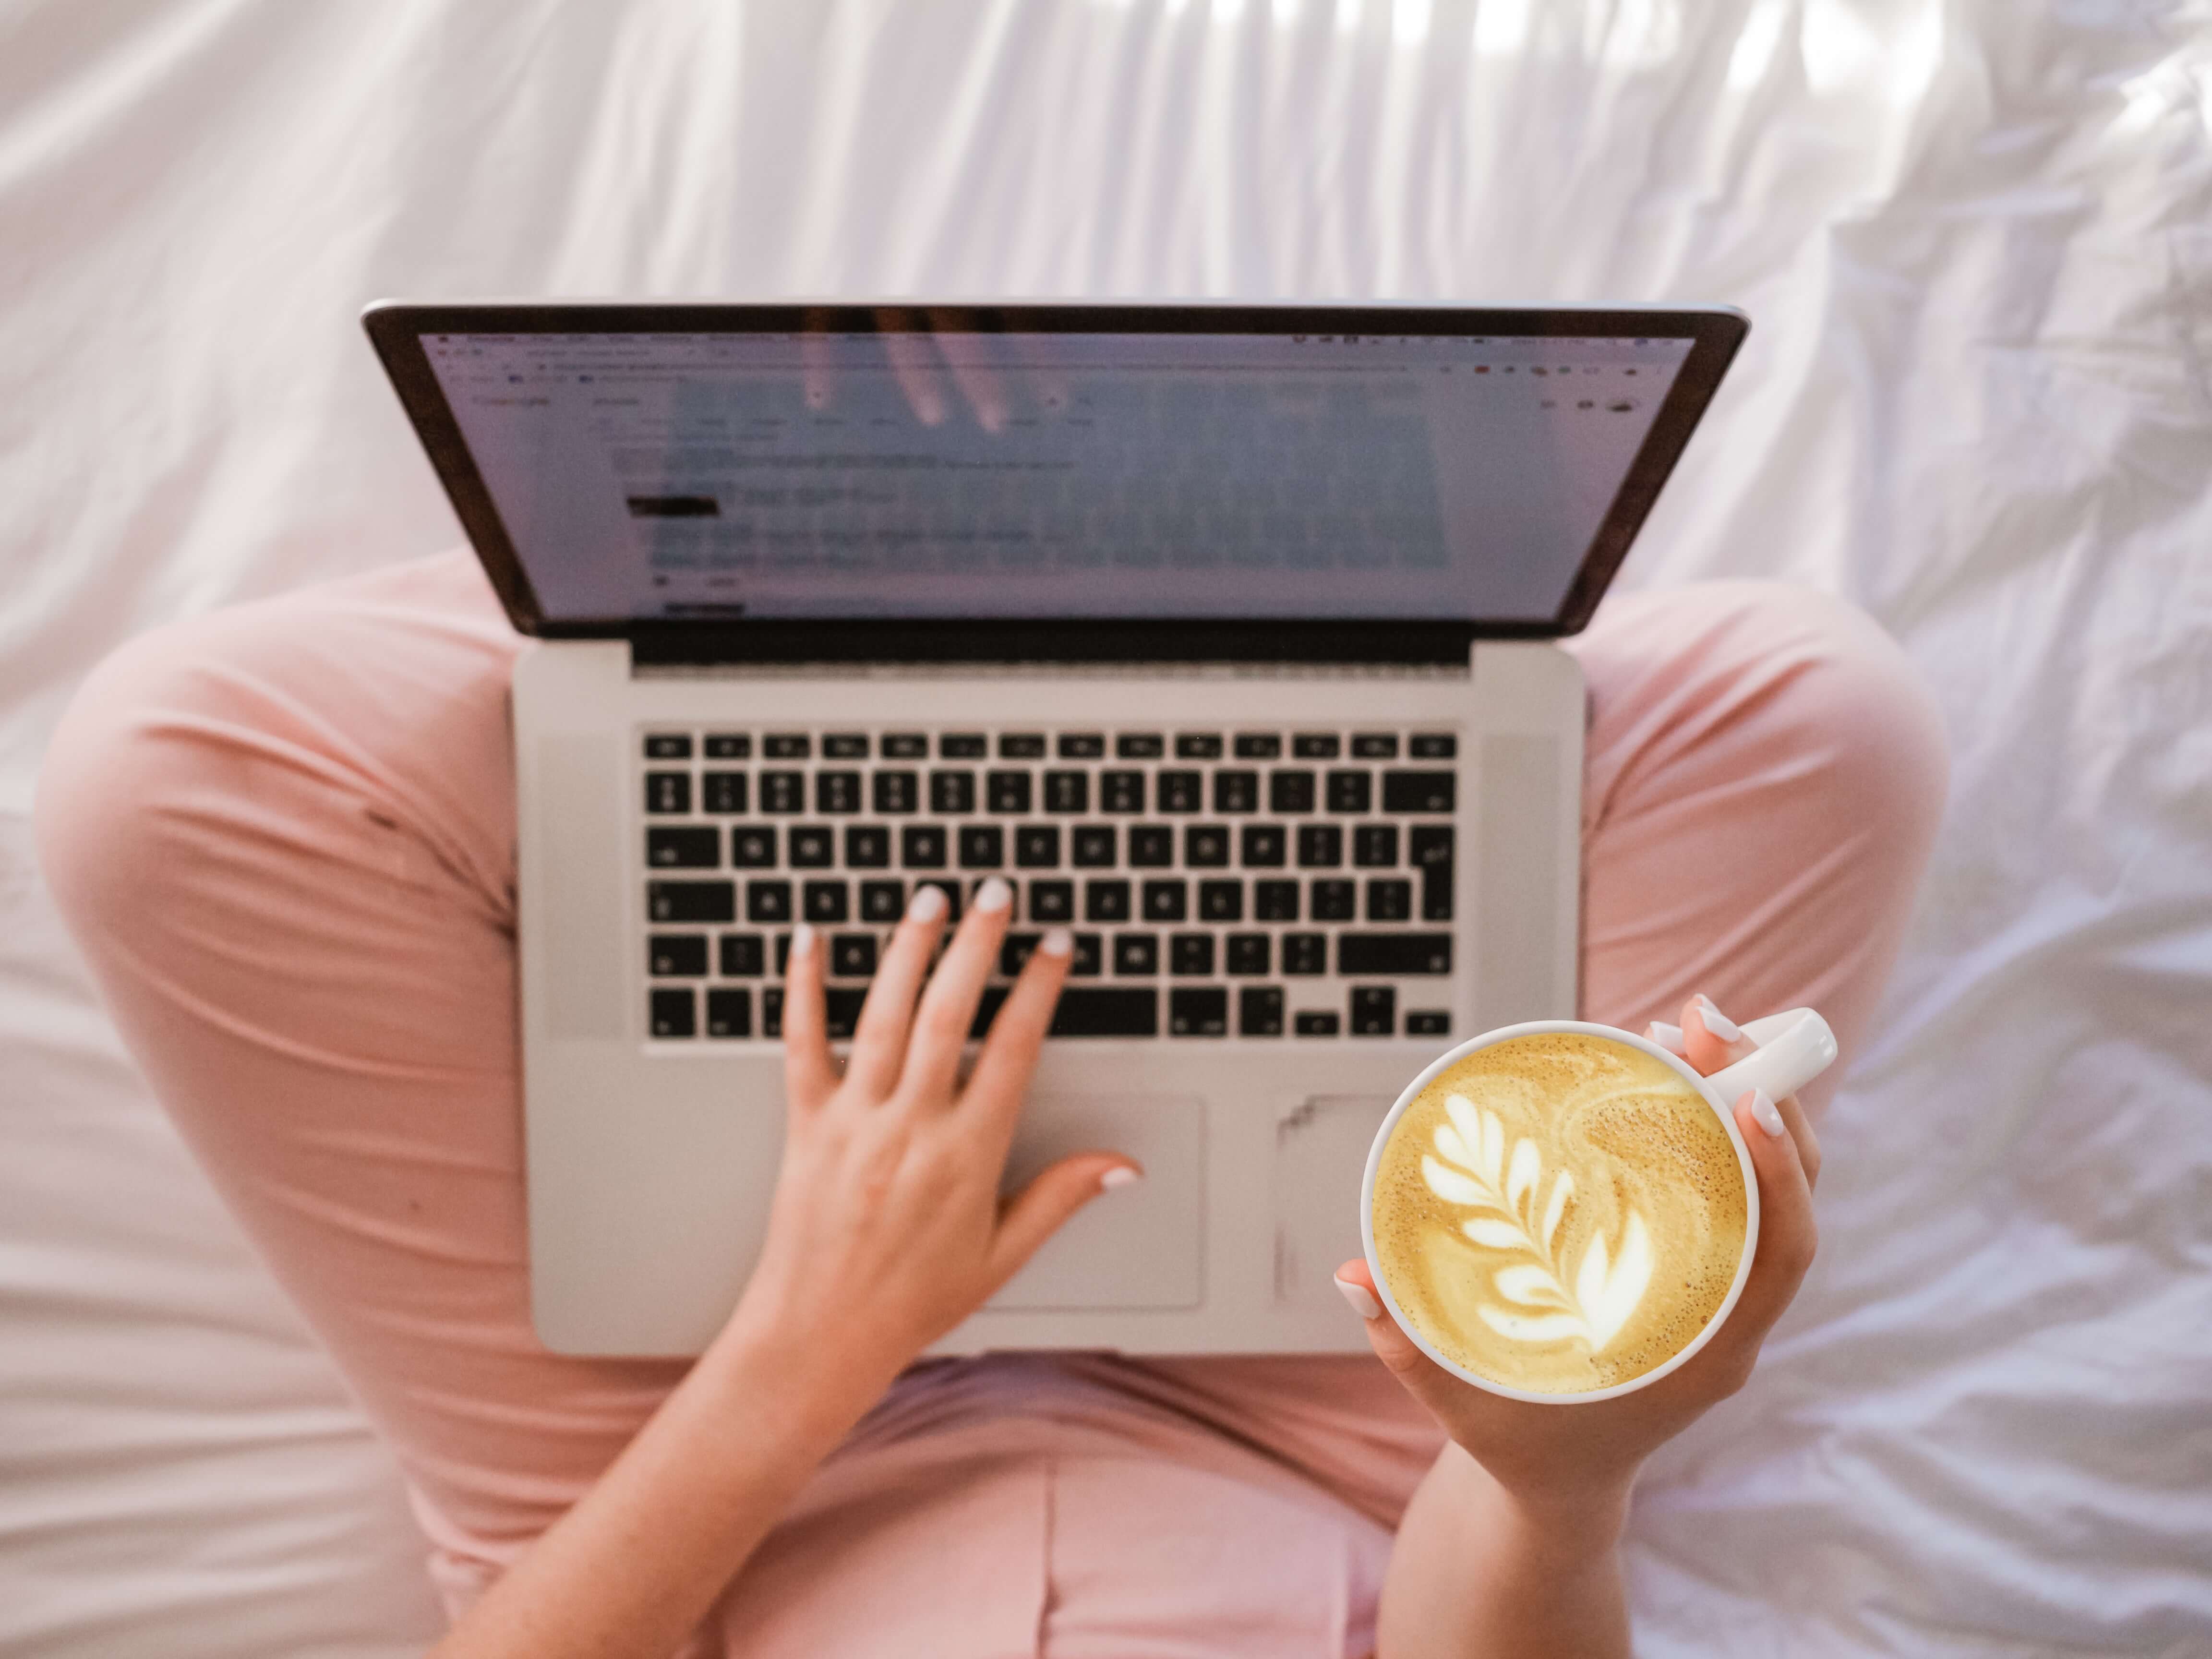 A shot from above of a person sitting on a bed using a laptop while holding a cappuccino with fancy foam art on it